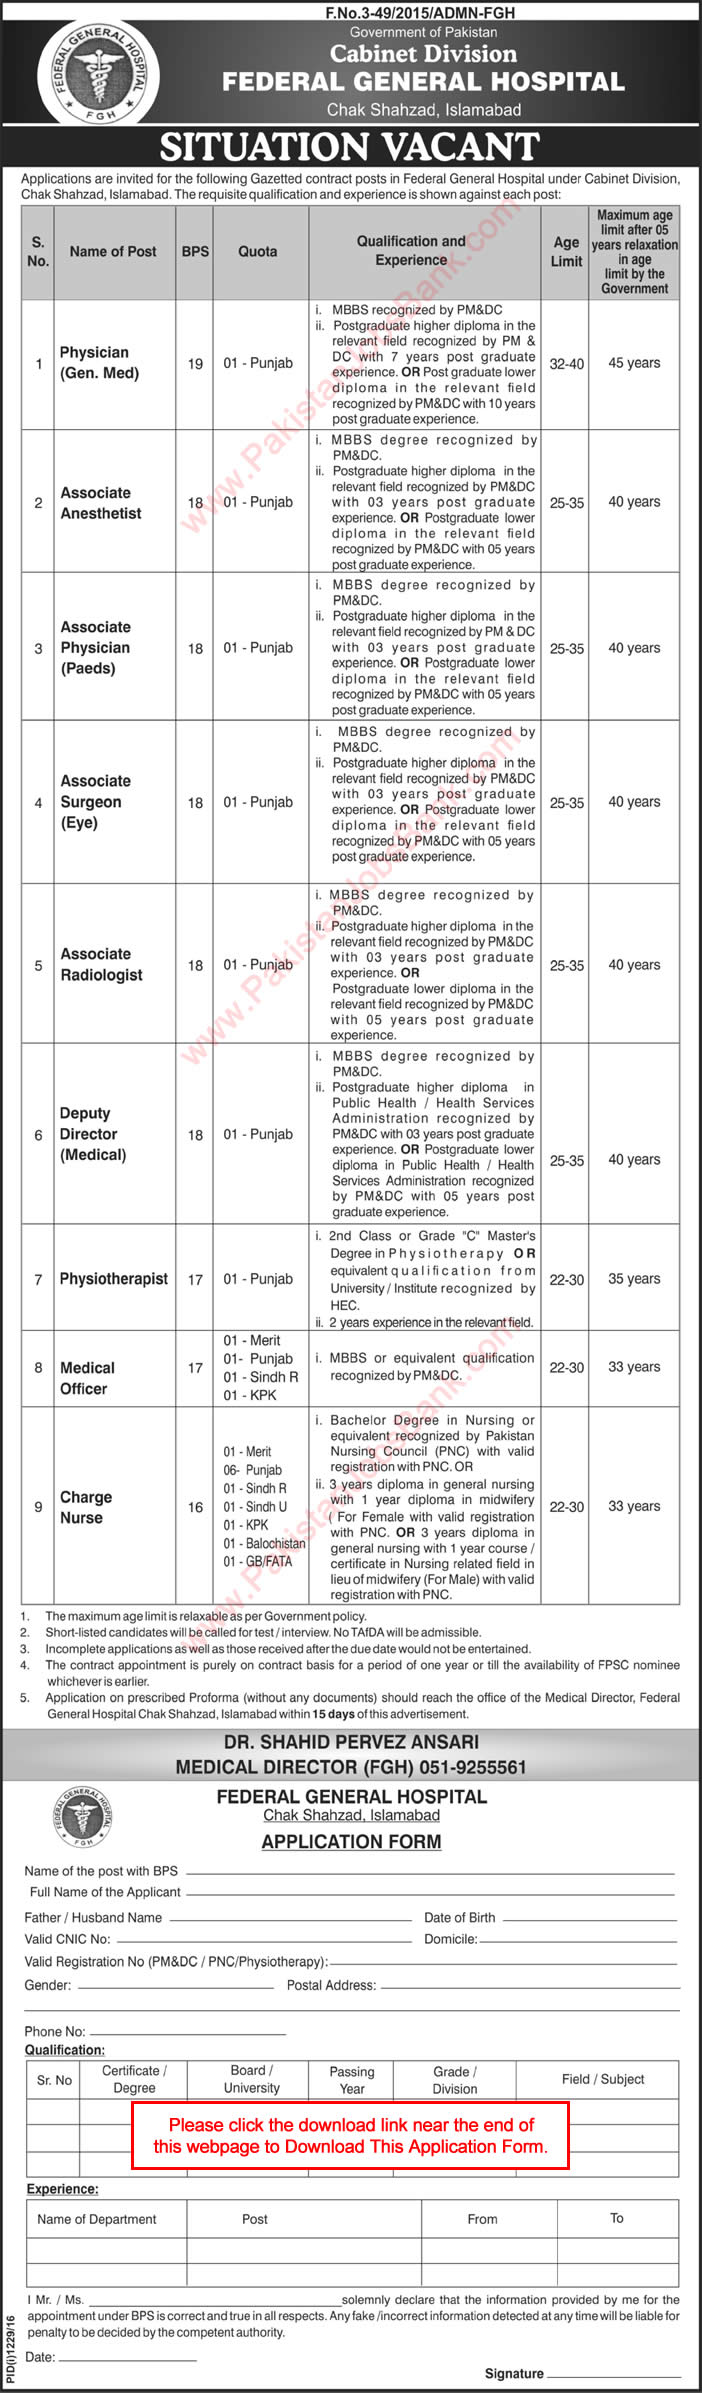 Federal General Hospital Islamabad Jobs September 2016 Application Form Charge Nurses, Medical Officers & Others Latest